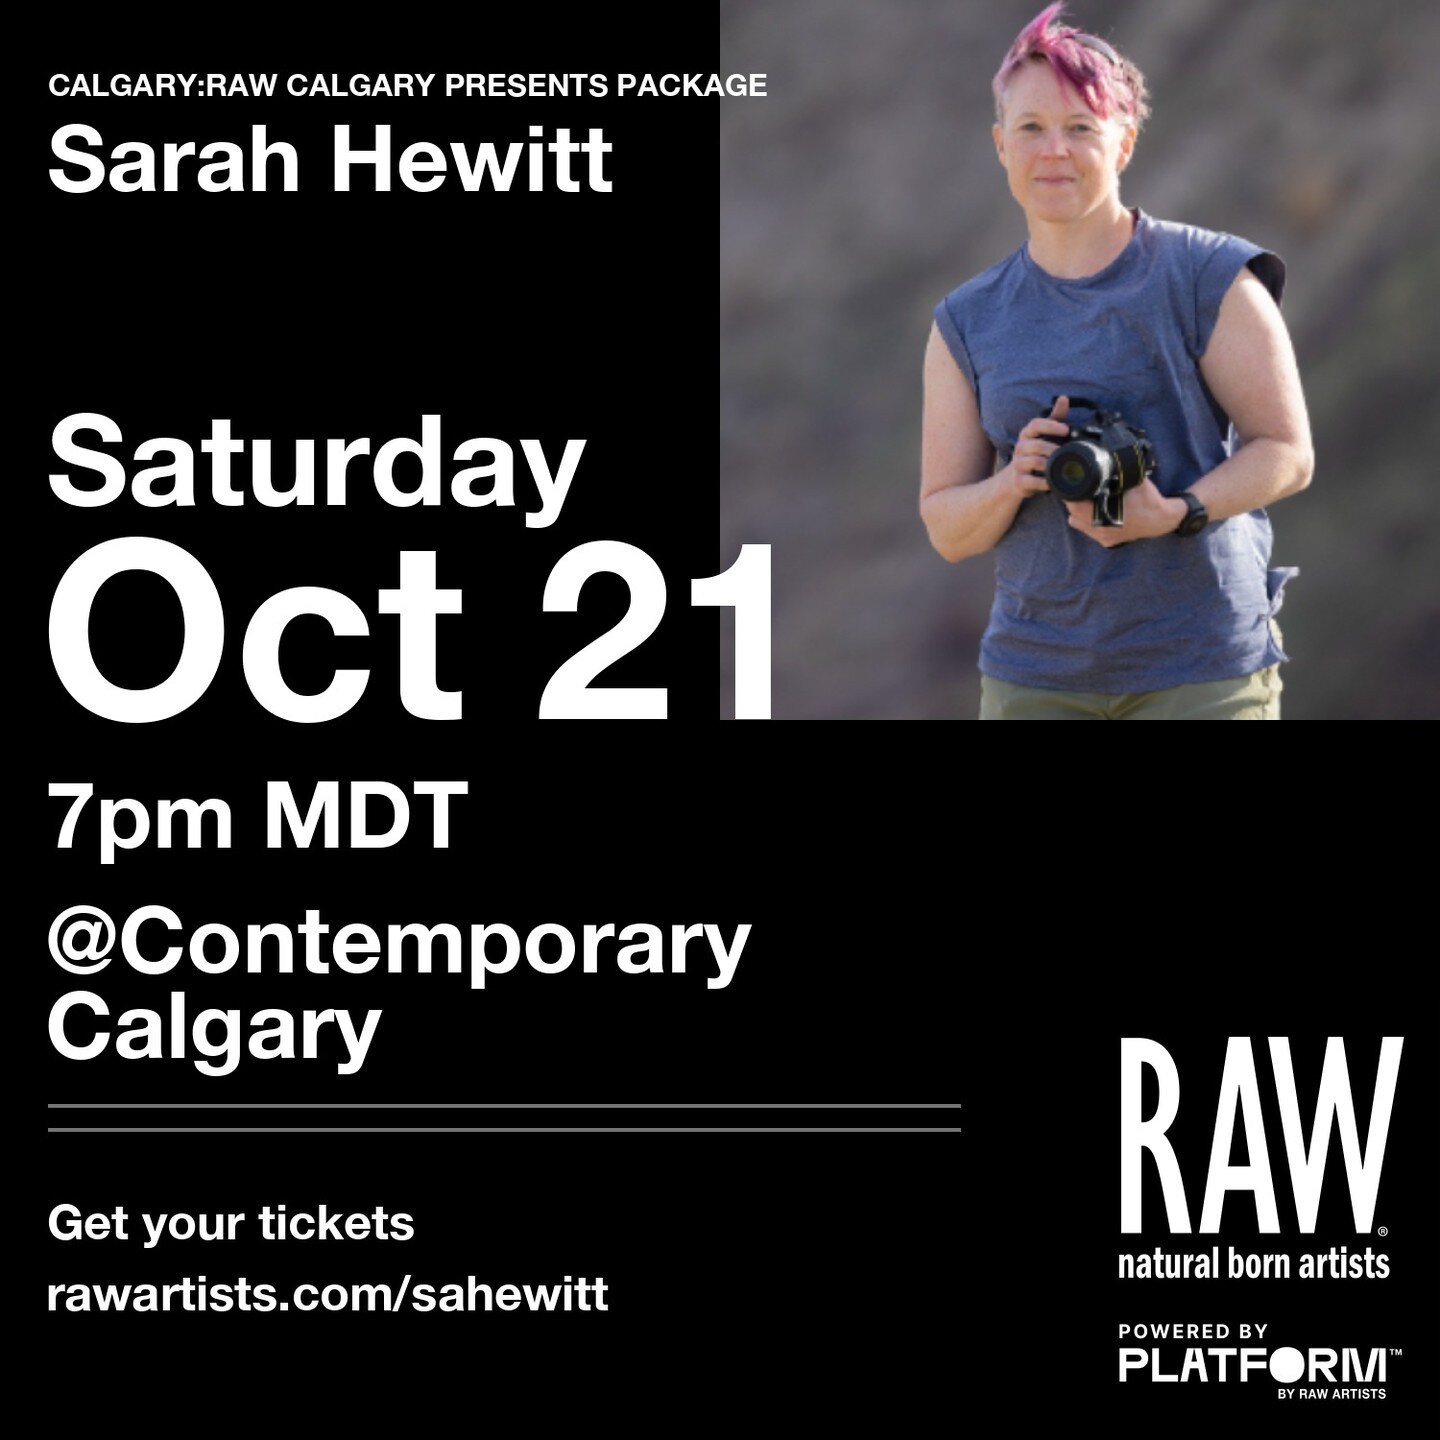 I'm excited to announce that I was selected by RAW Artists Calgary to show some of my photography at their next artist showcase. The event is on Saturday, October 21 at Contemporary Calgary from 7pm-midnight and there will be tons of talented artists